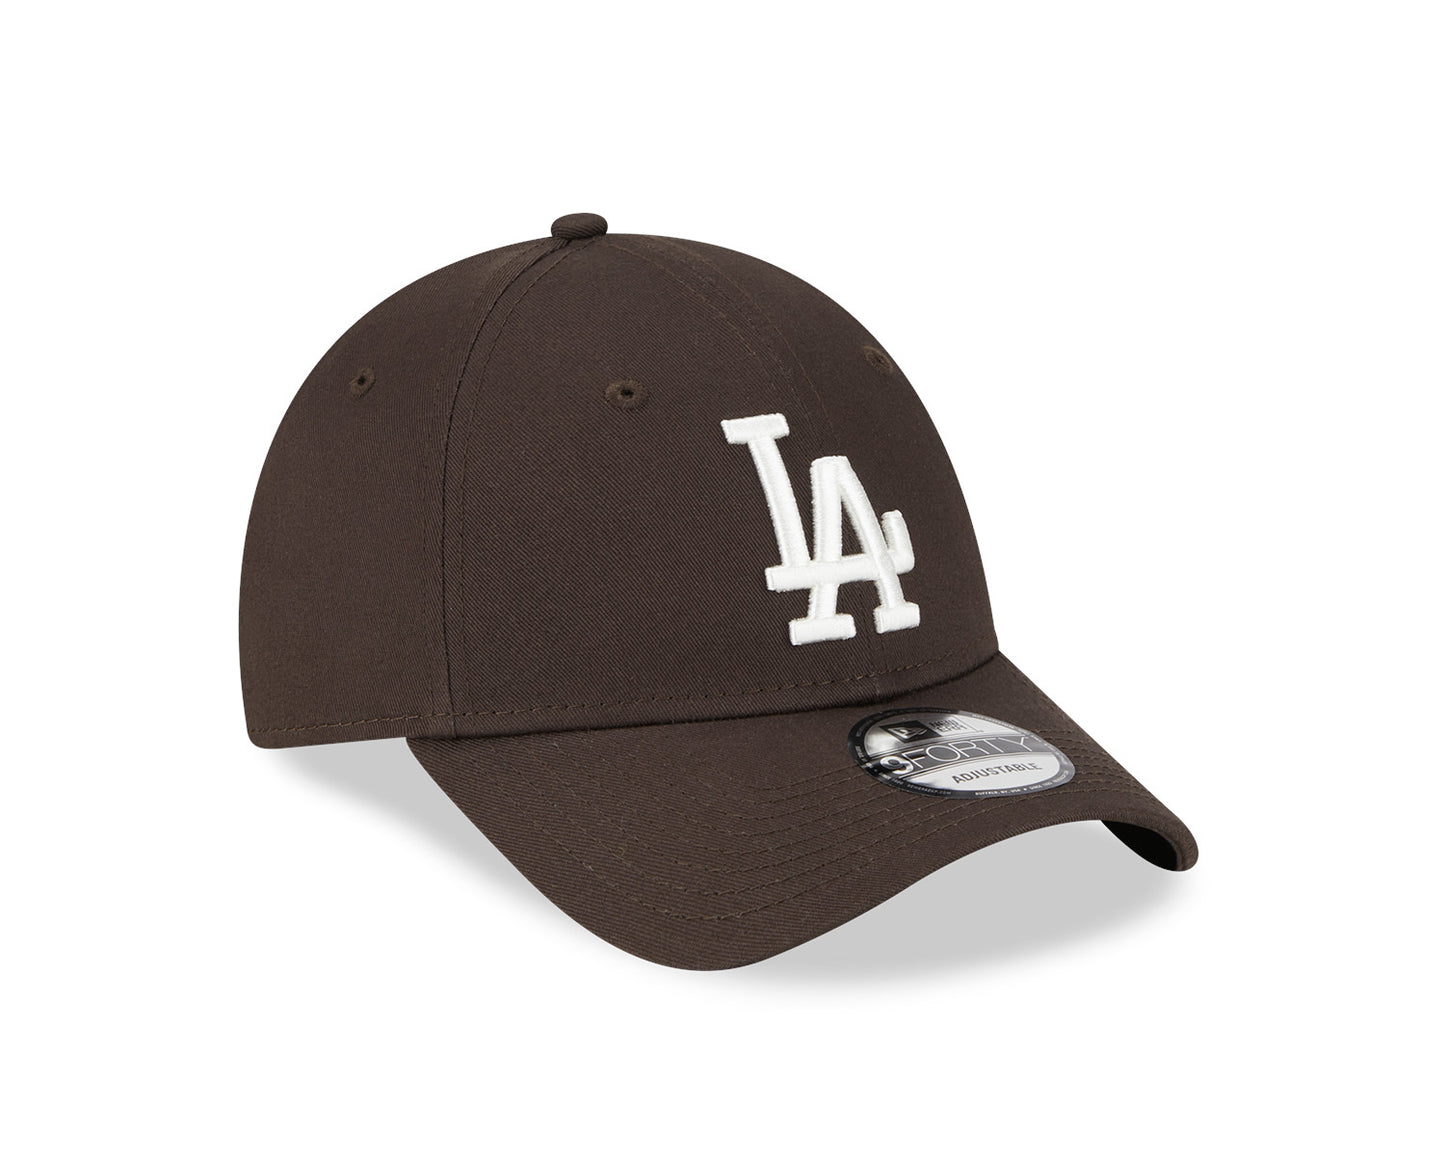 NEW ERA 9FORTY MLB LOS ANGELES DODGERS LEAGUE ESSENTIAL BROWN CAP